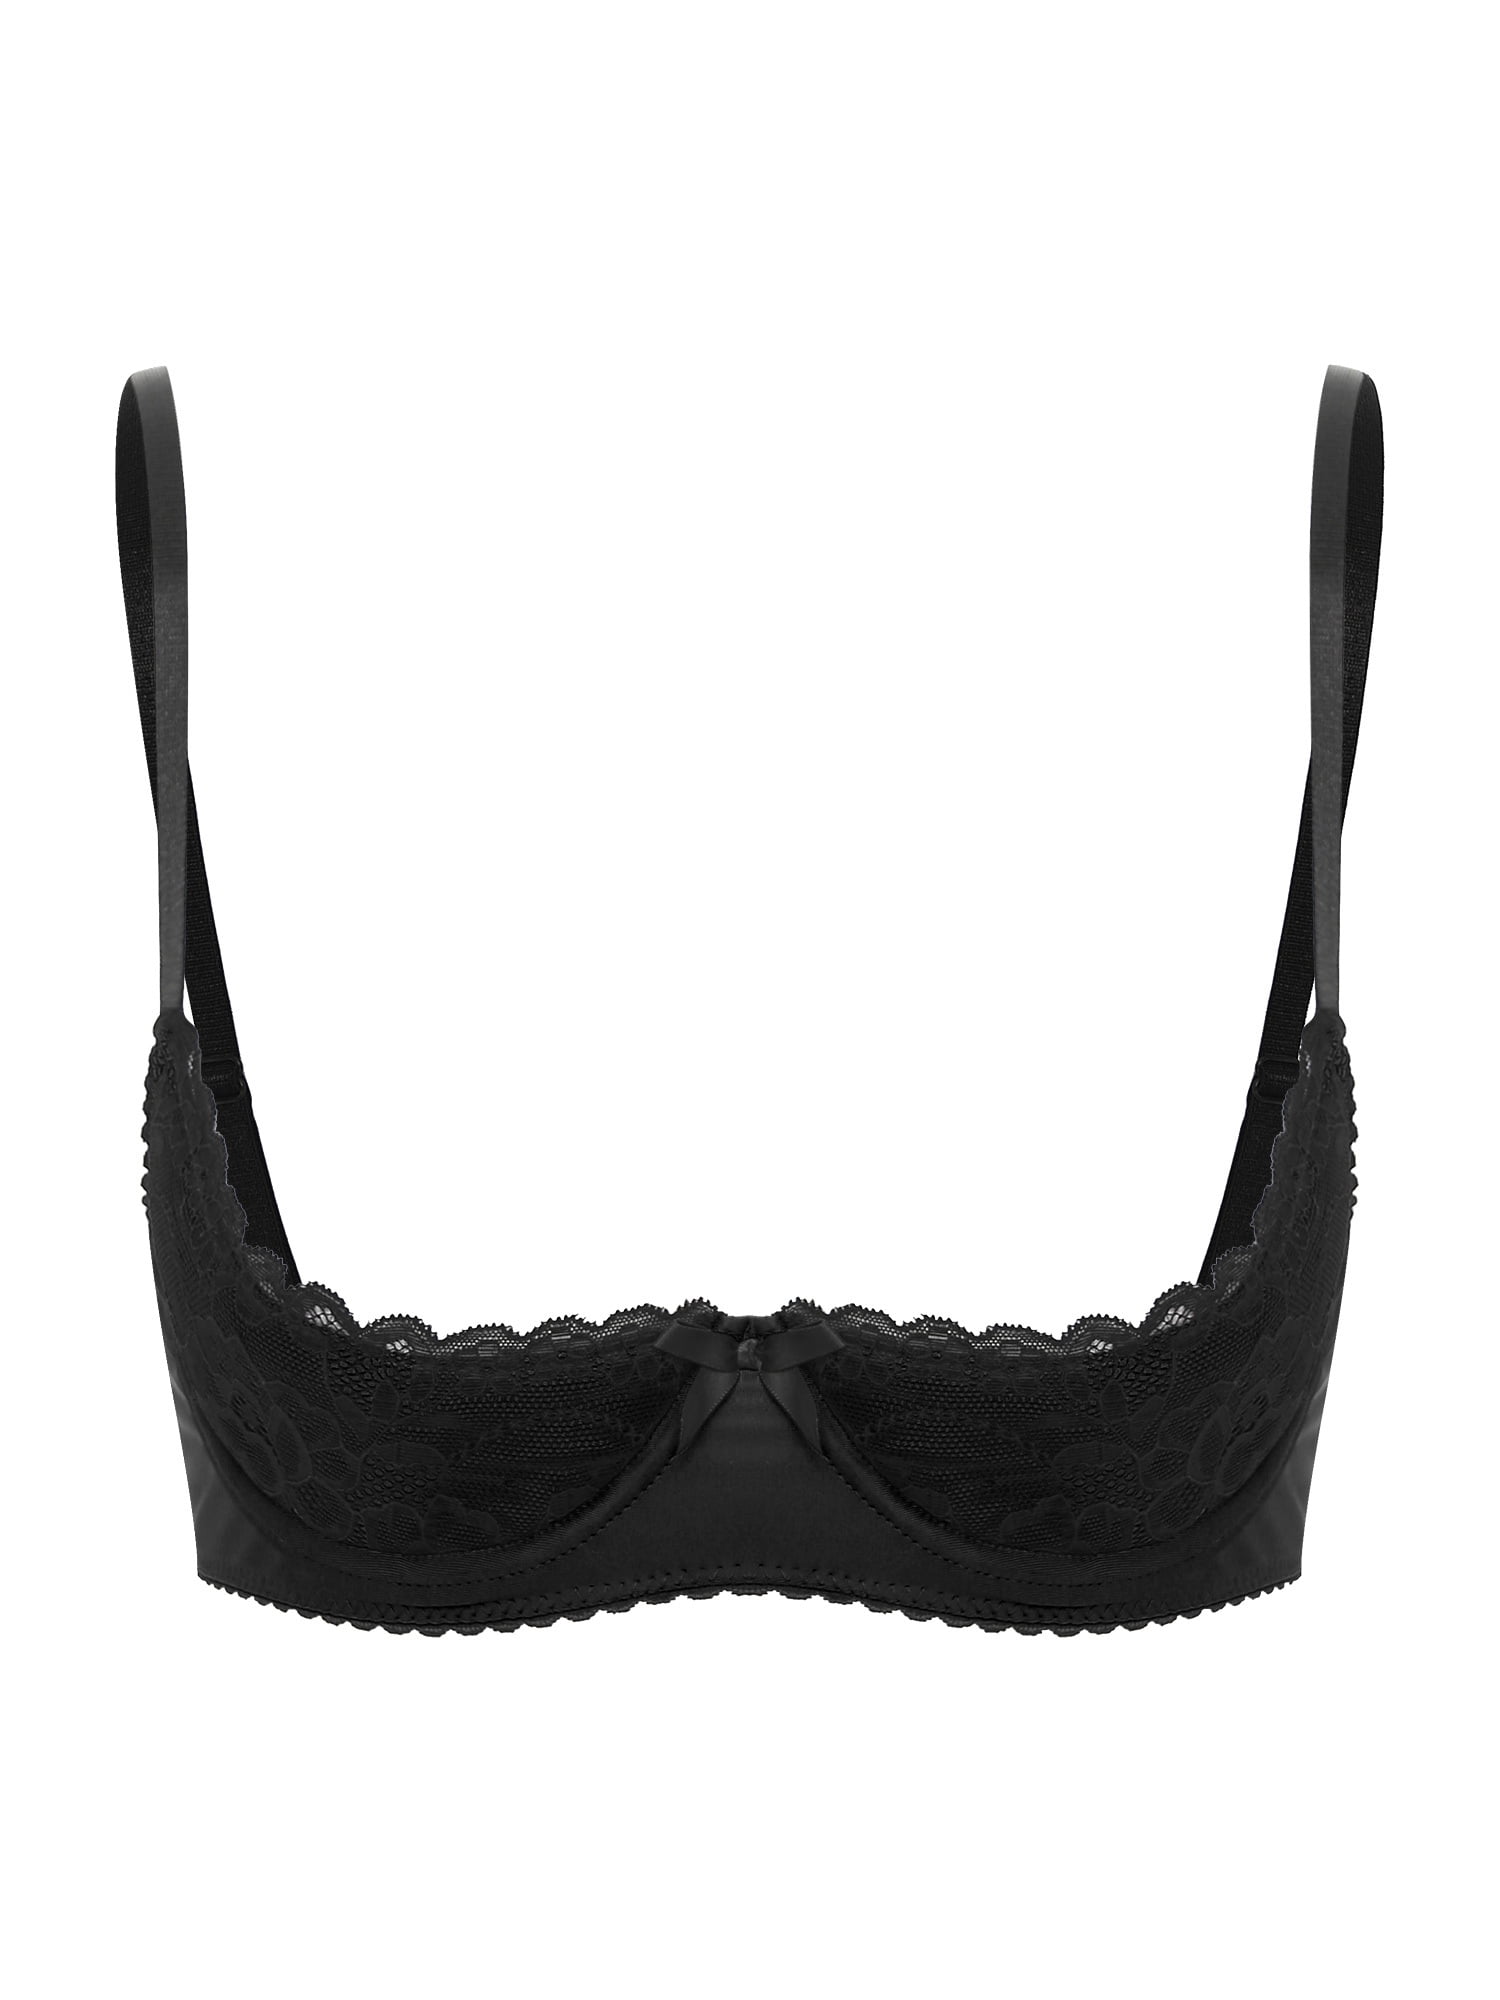 TiaoBug Women's Sexy Lace Quarter Cup Underwired Shelf Bra Tops See Through  Bralette Balconette